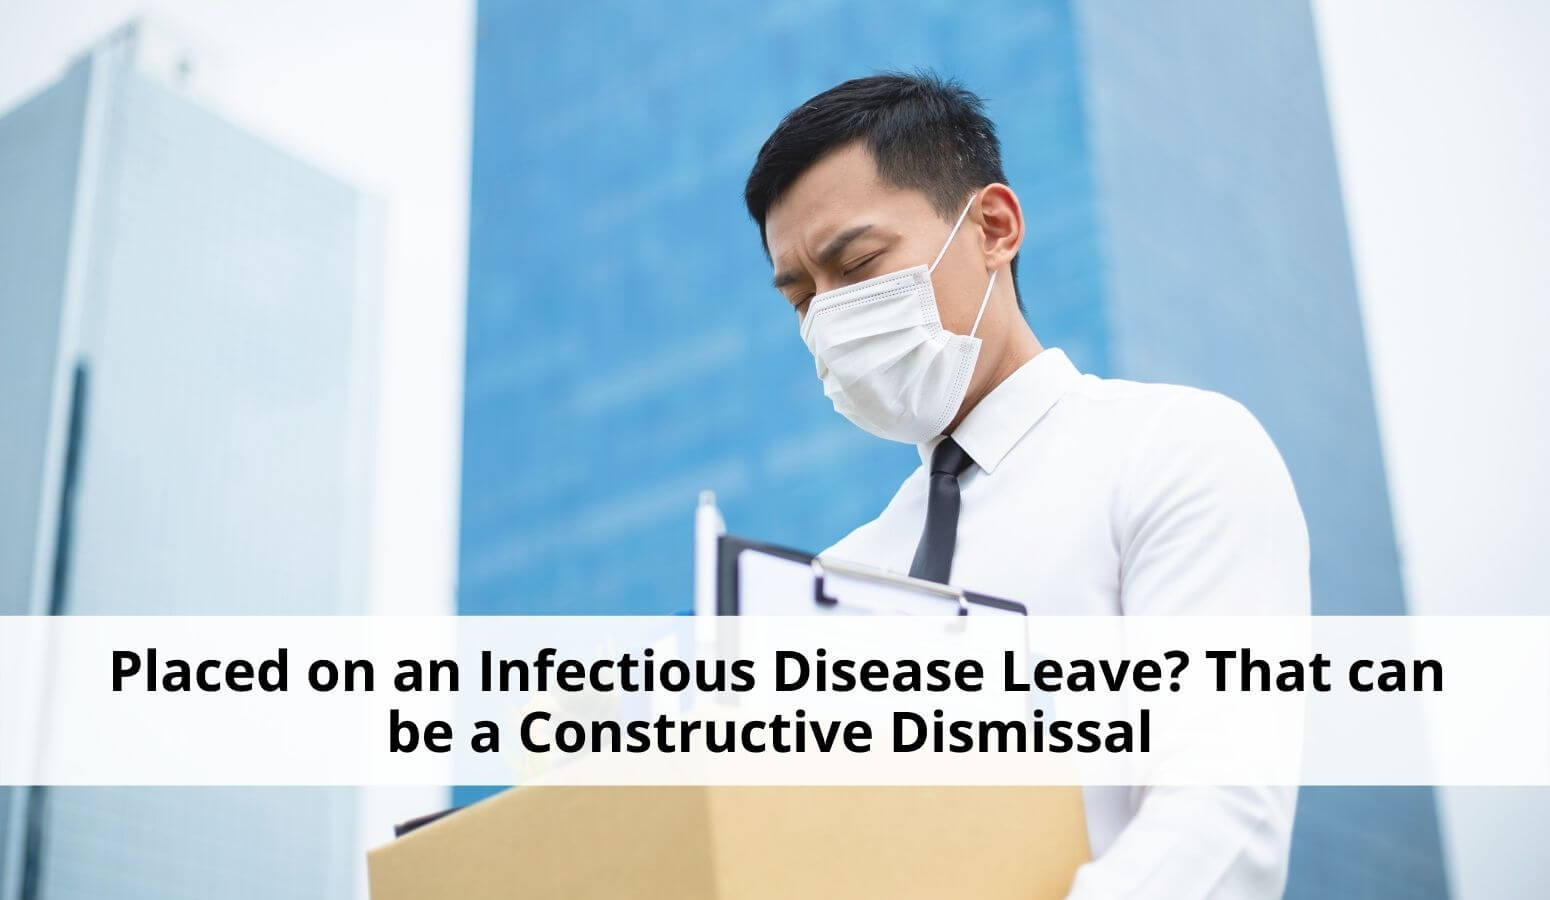 Featured image for “Placed on an Infectious Disease Emergency Leave? That can be a Constructive Dismissal”